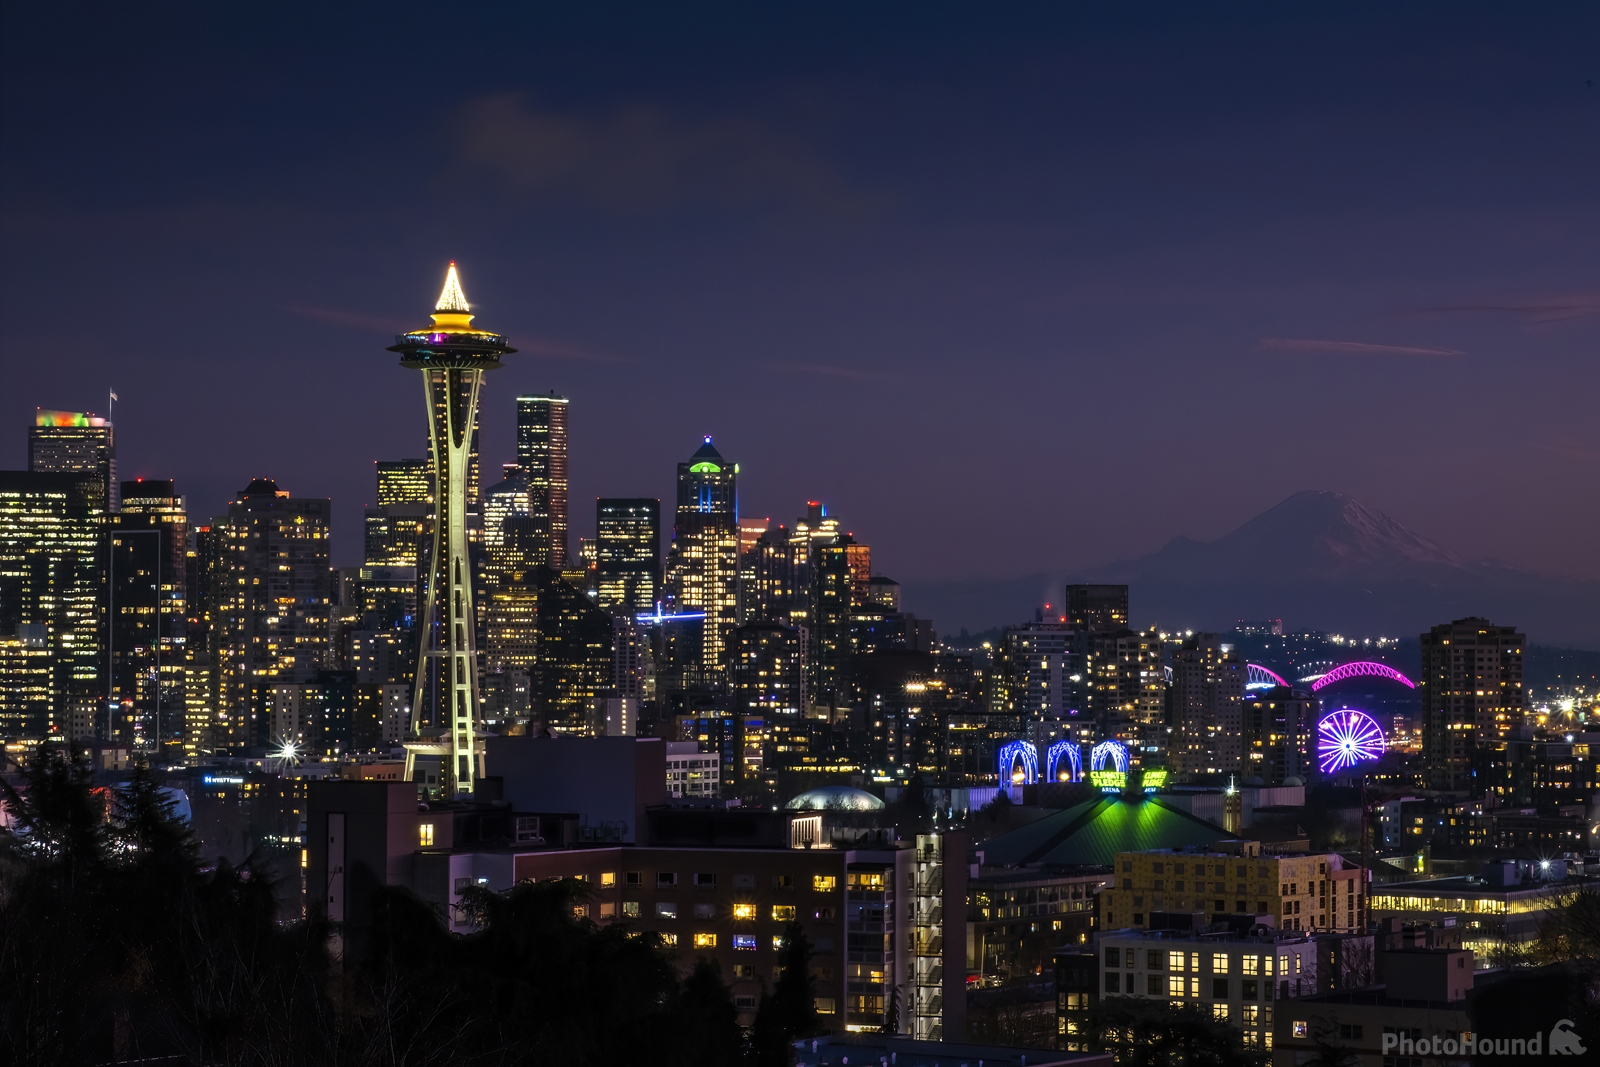 Image of Kerry Park by Arnie Lund